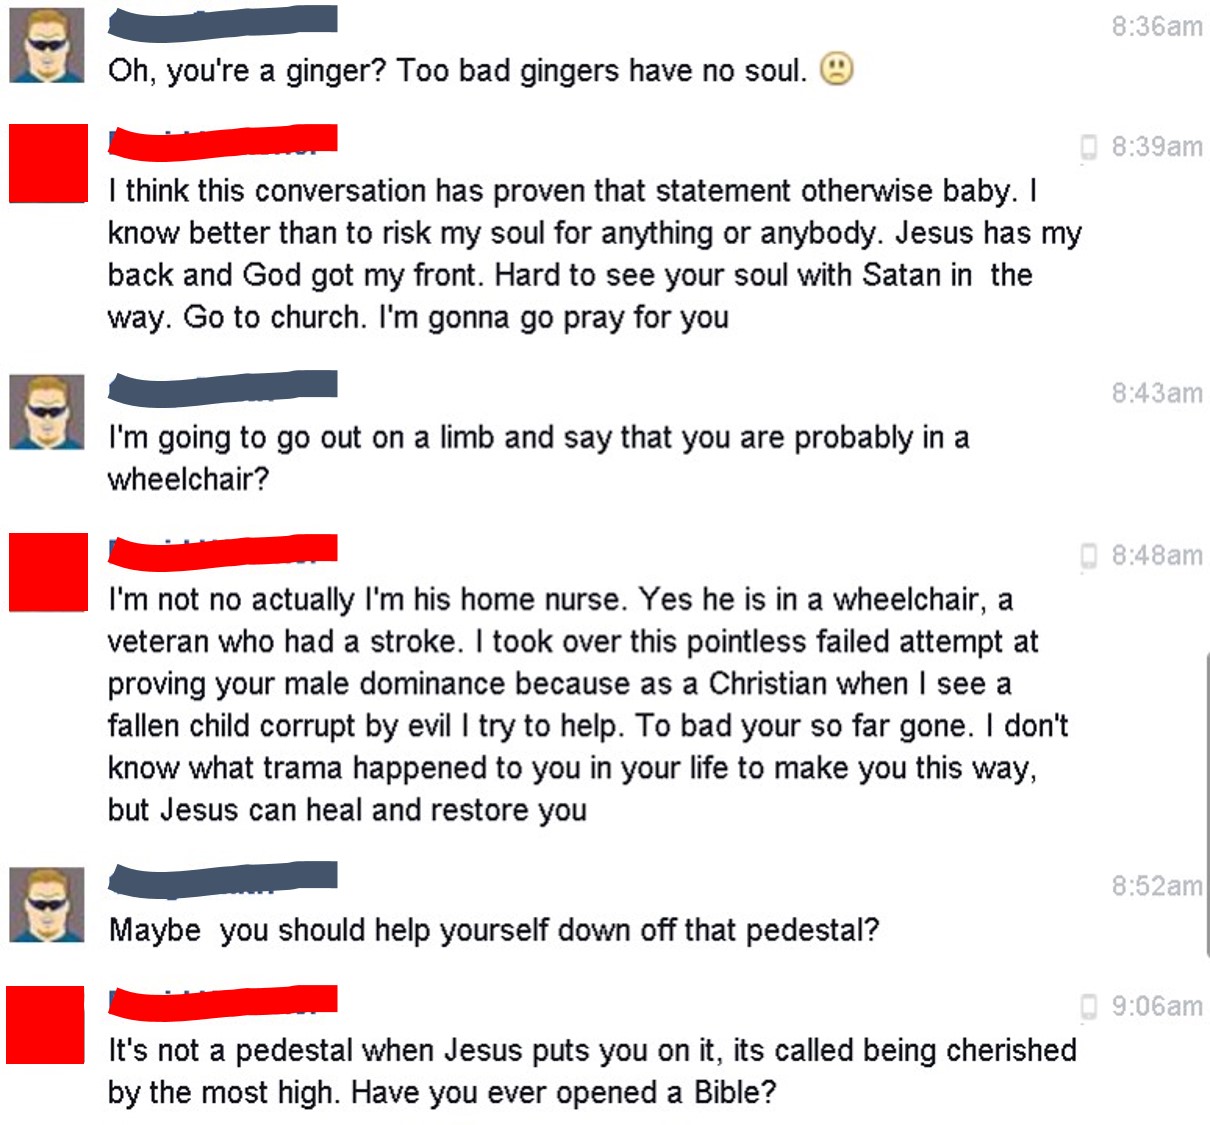 Religion with a side of potty mouth